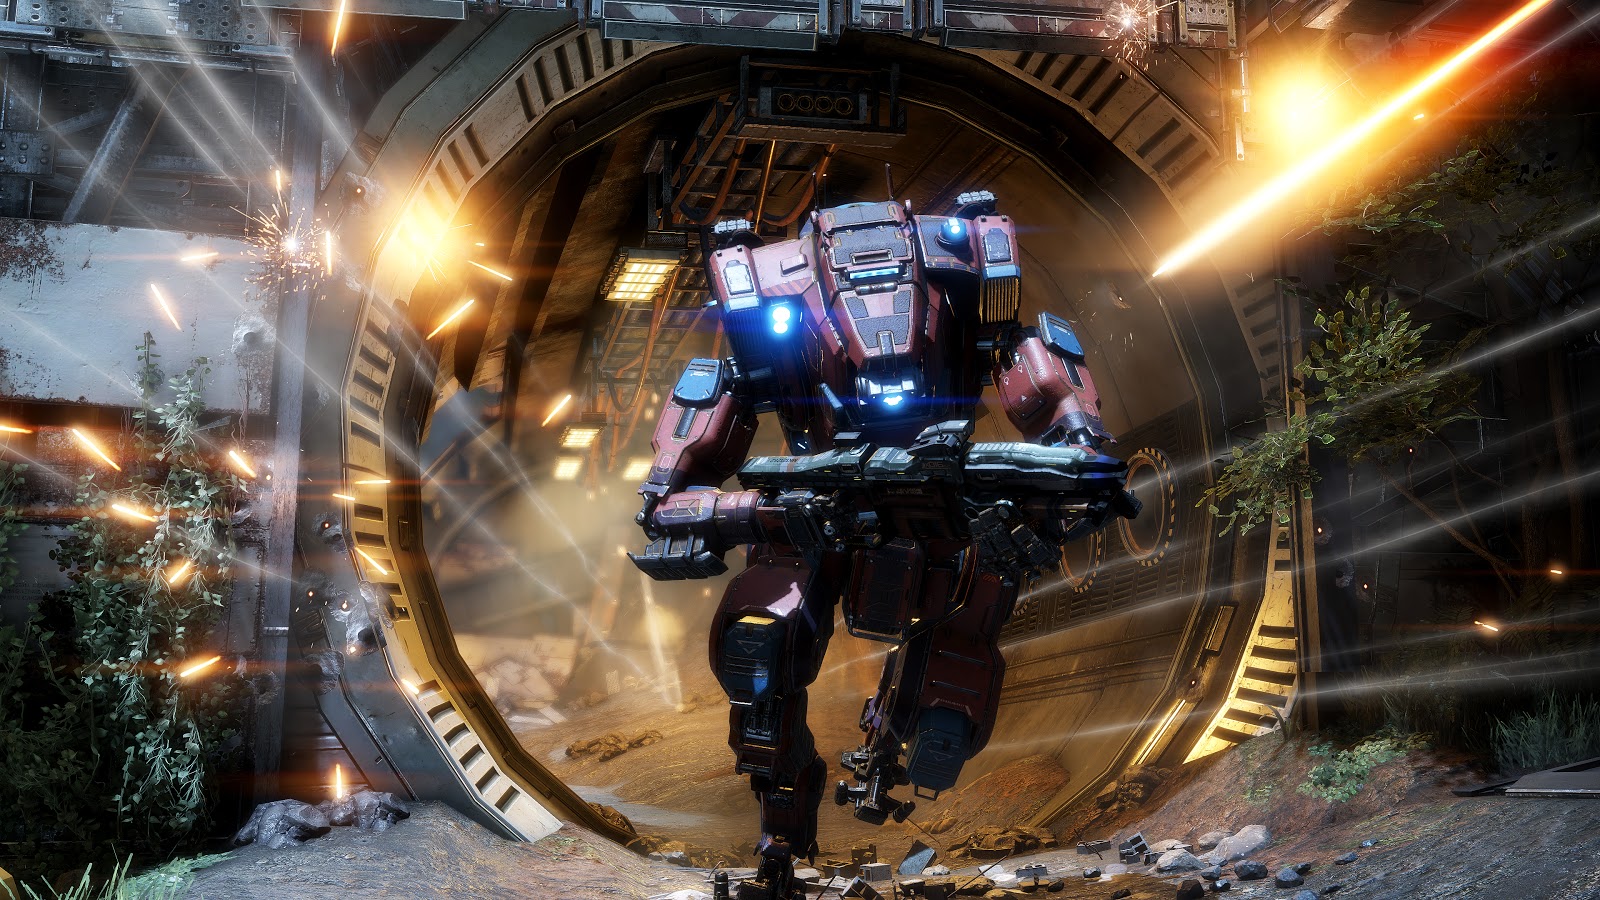 New Gameplay Trailer for Titanfall 2 DLC Monarch's Reign - mxdwn Games